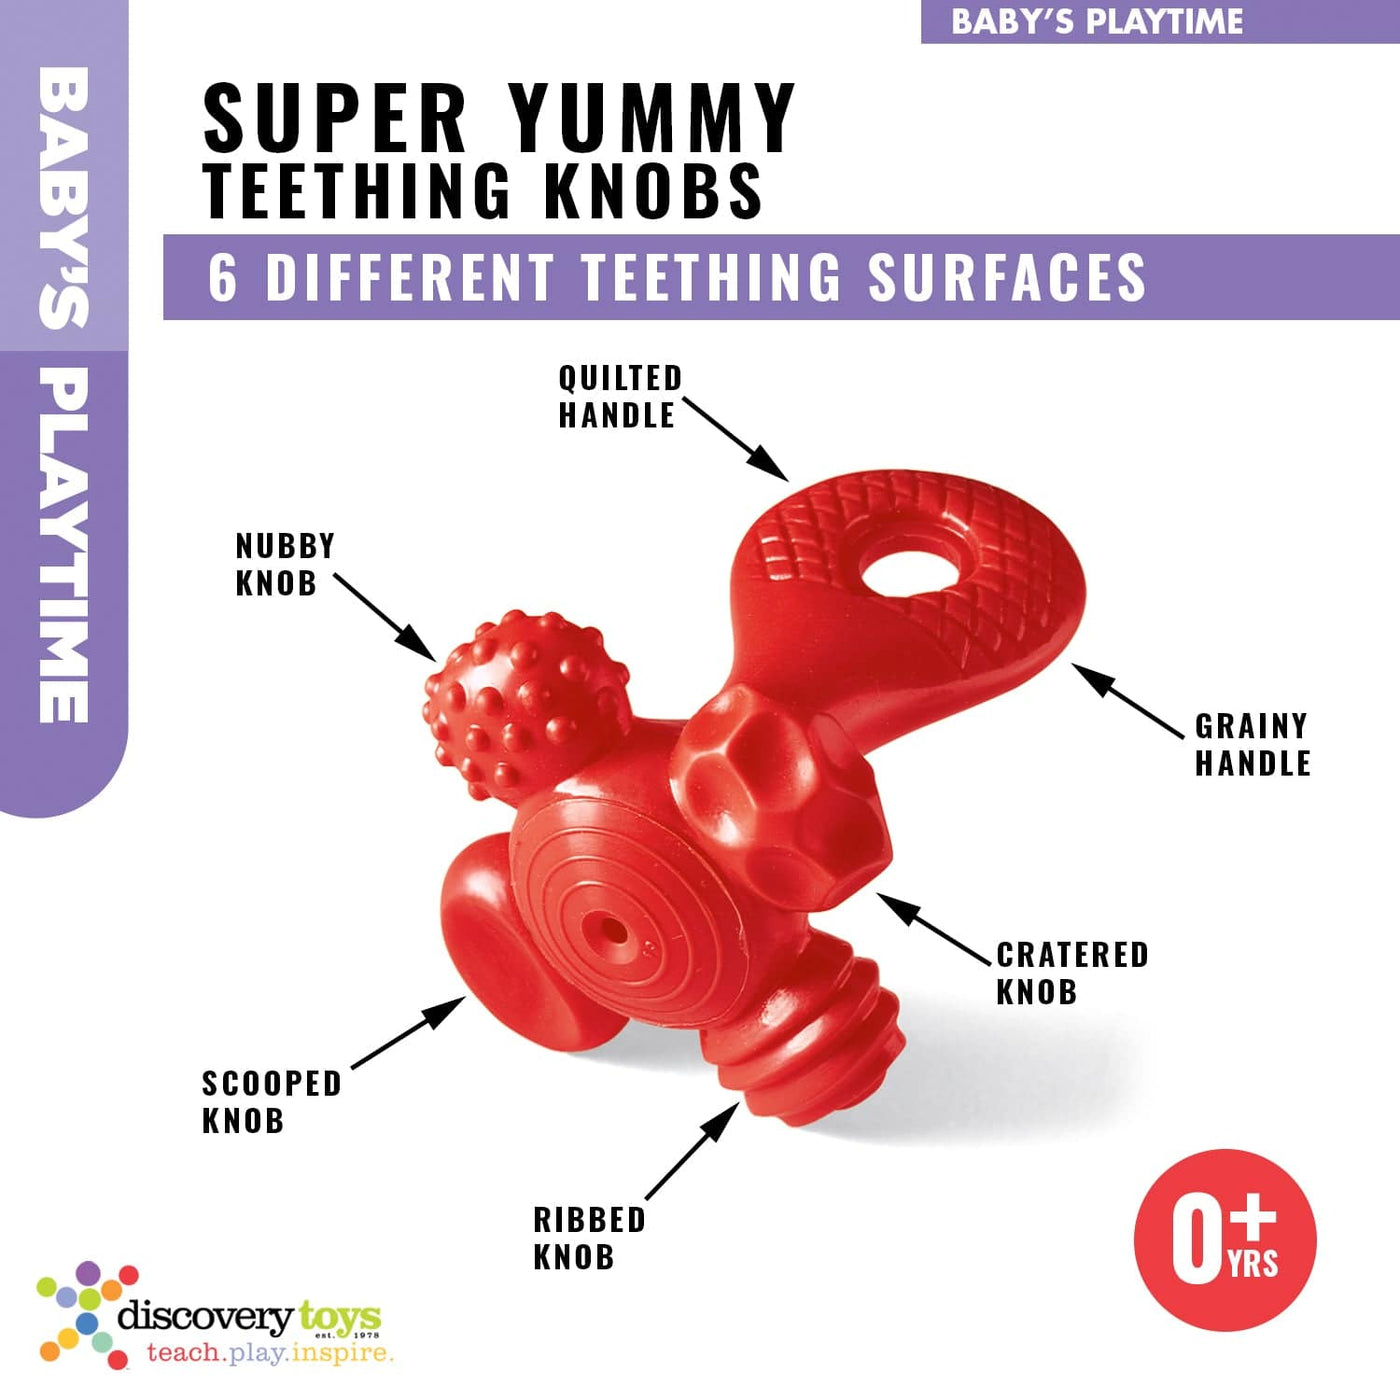 SUPER YUMMY Infant Teething Toy - Discovery Toys